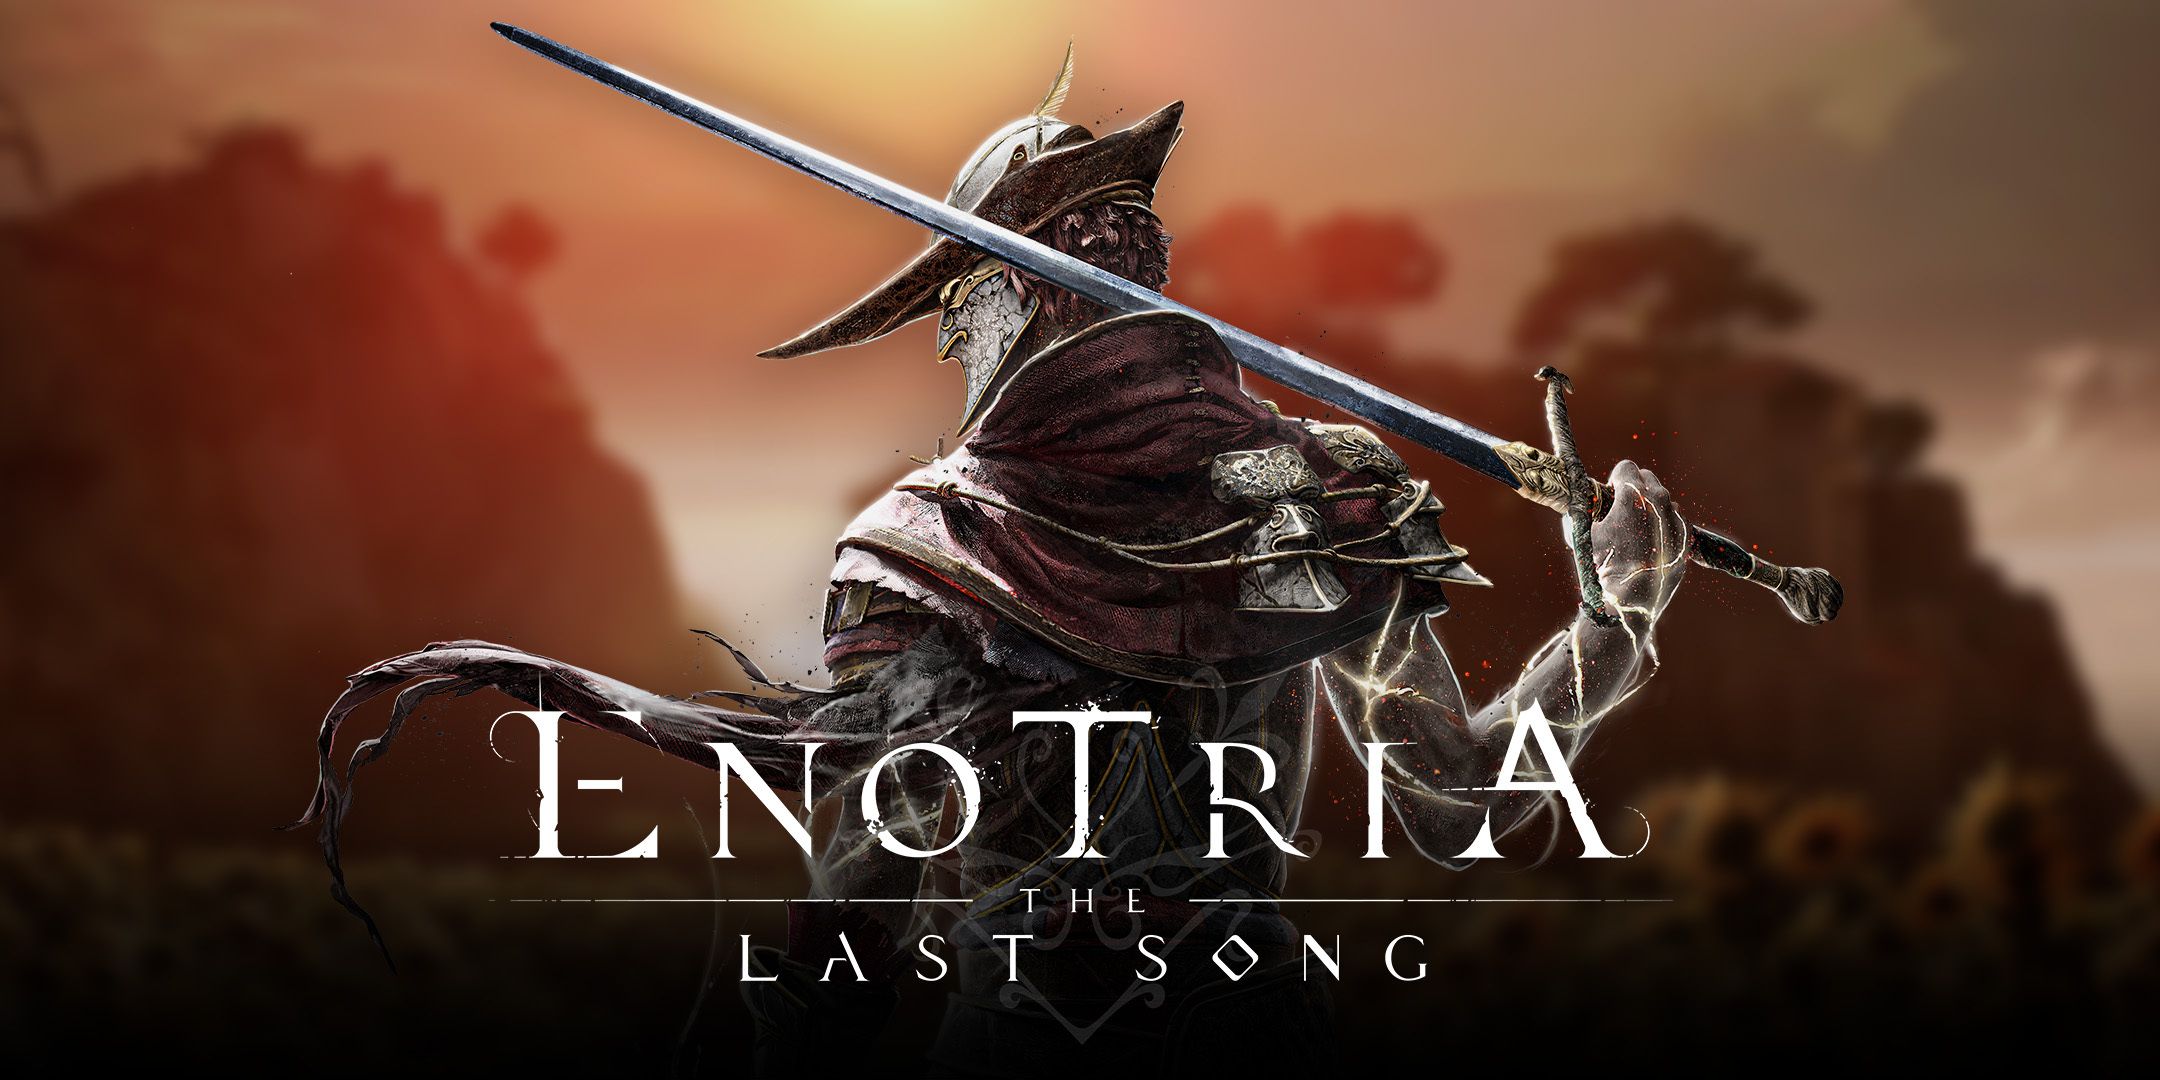 enotria-the-last-song-preview-thumbnail-2-2